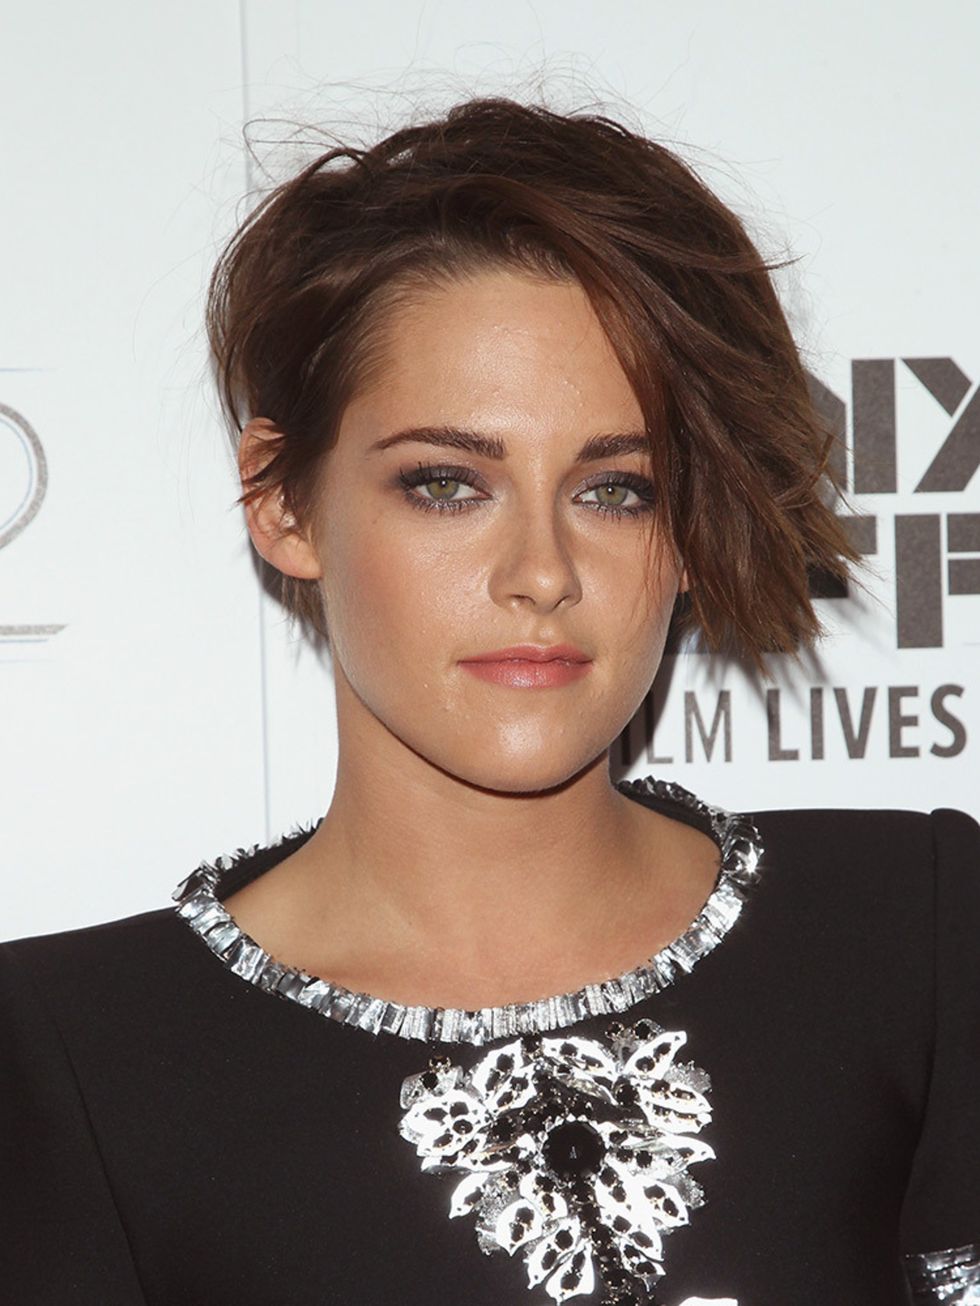 <p><a href="http://www.elleuk.com/fashion/celebrity-style/kristen-stewart-style-file">Kristen Stewart</a></p>

<p>On people who say they aren't feminists: 'That's such a strange thing to say, isn't it? Like, what do you mean? Do you not believe in equalit